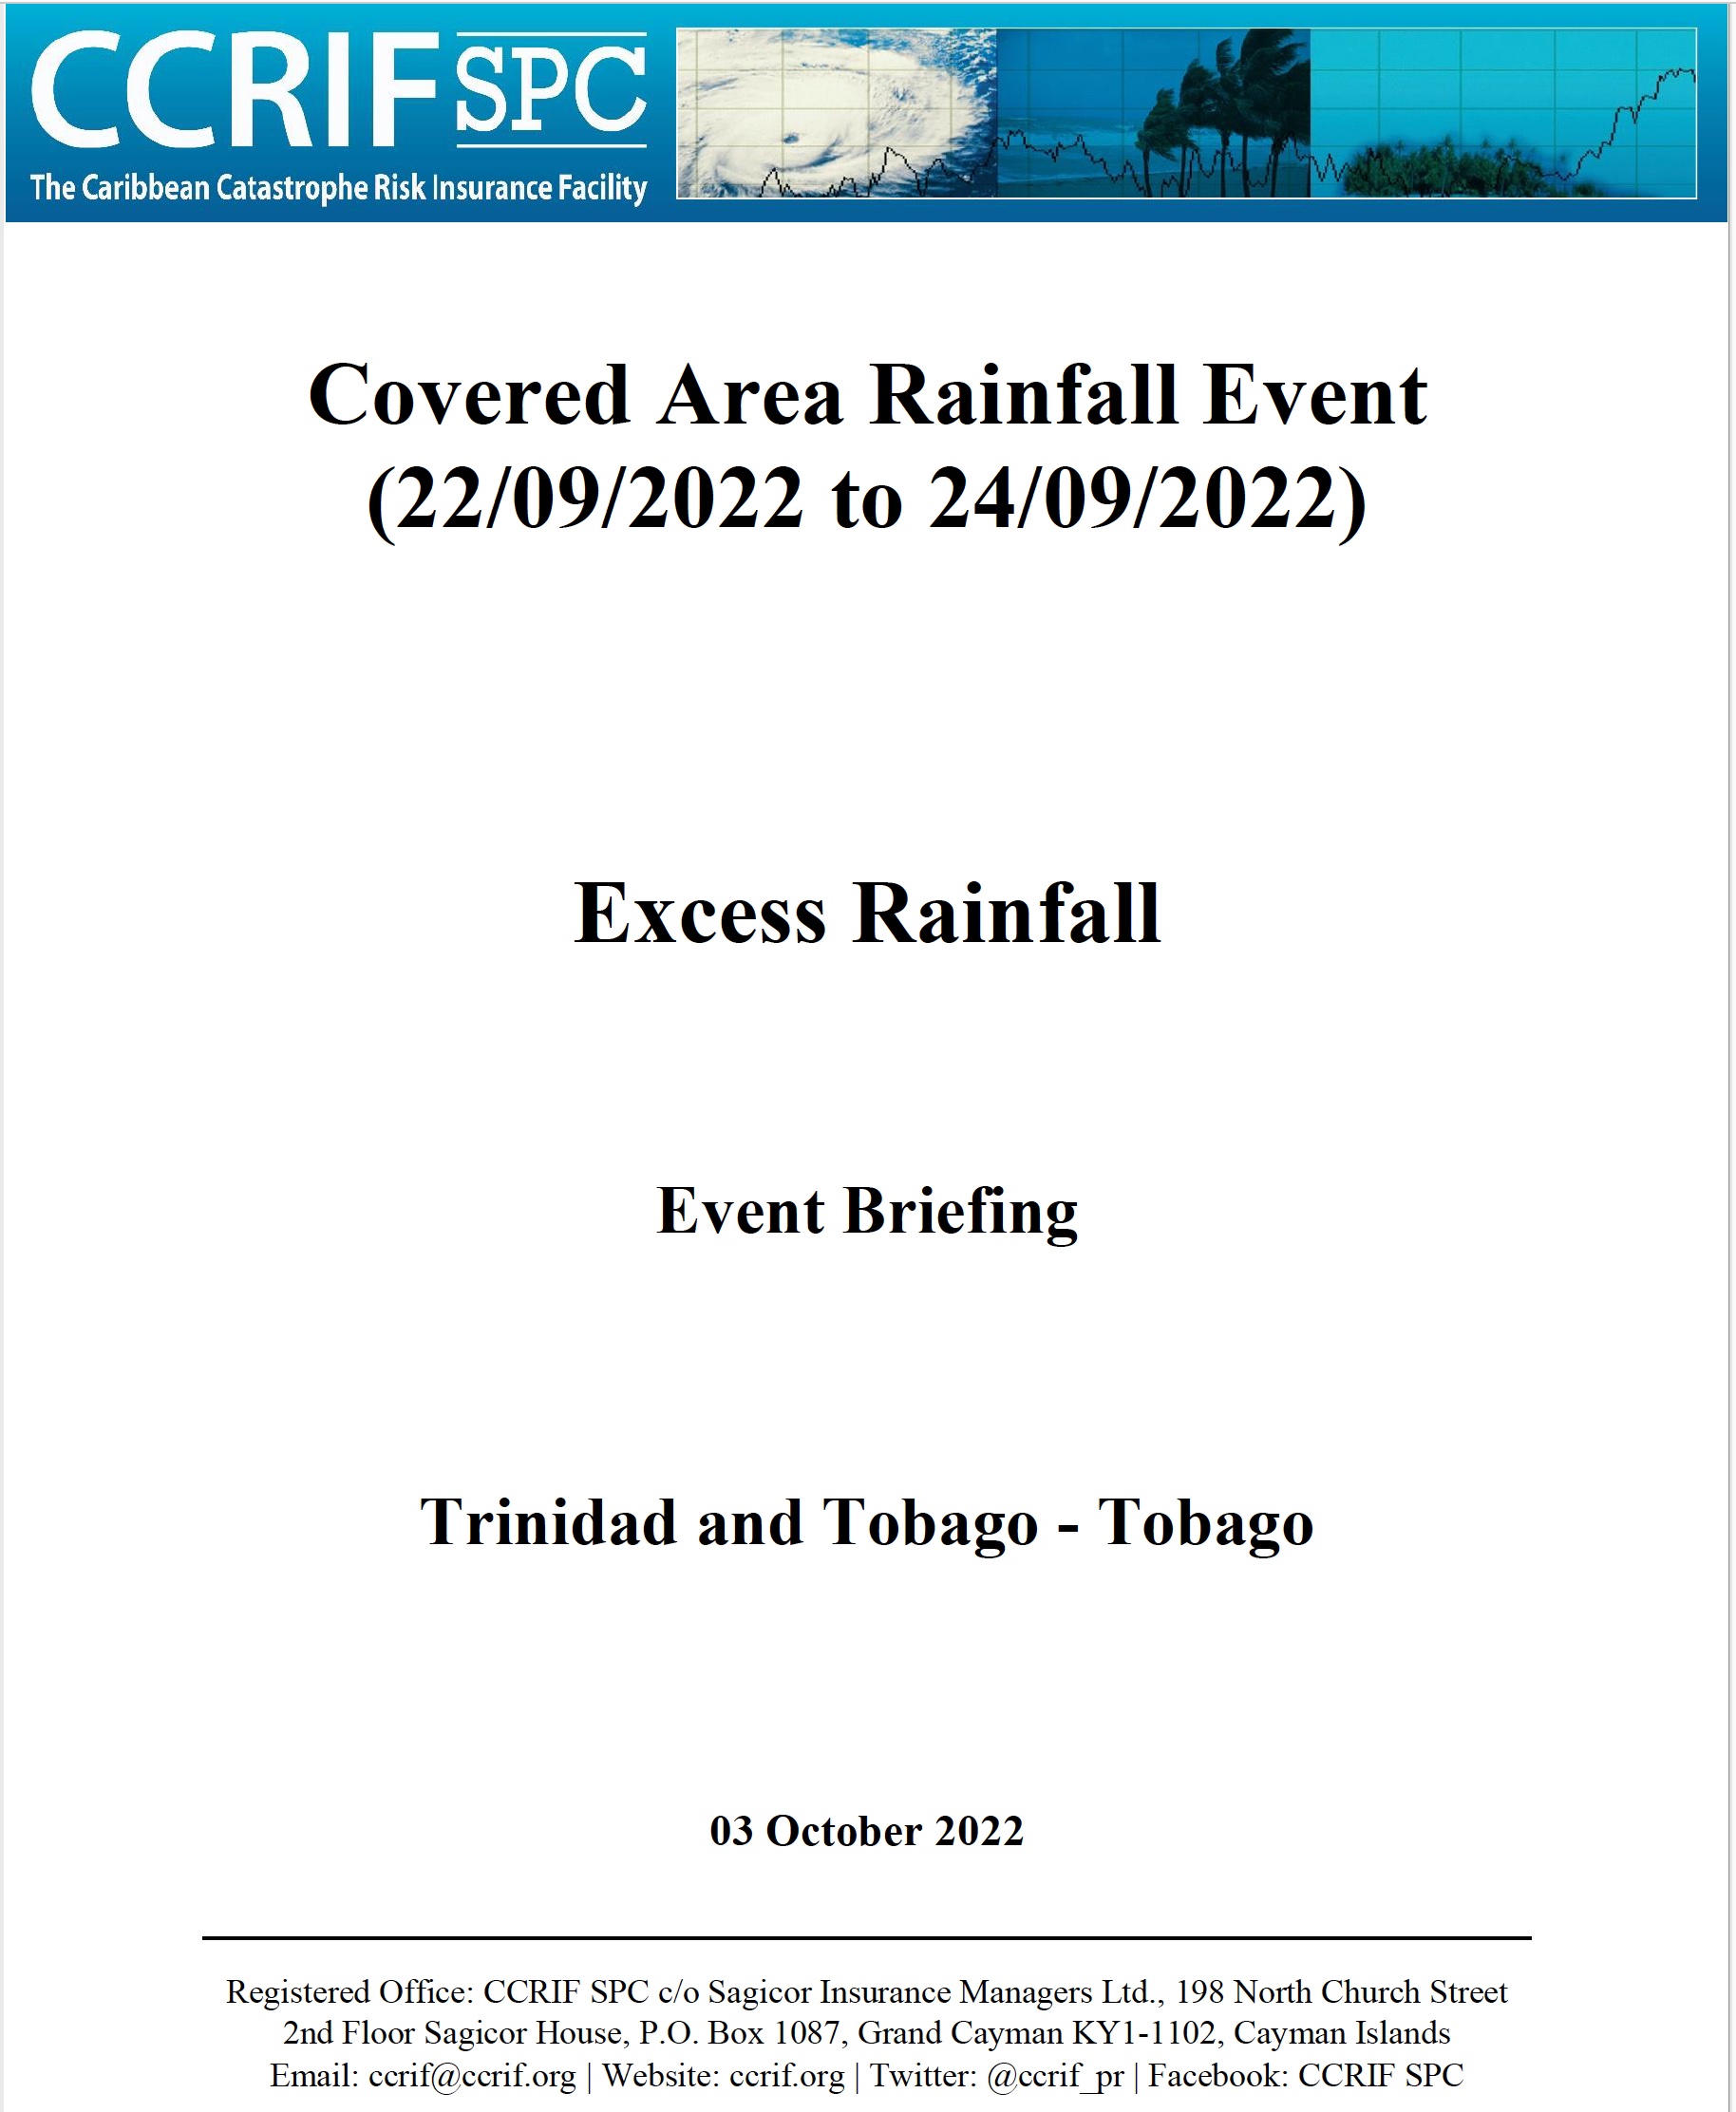 Event Briefing - Excess Rainfall - Covered Area Rainfall Event - Trinidad and Tobago - October 3 2022